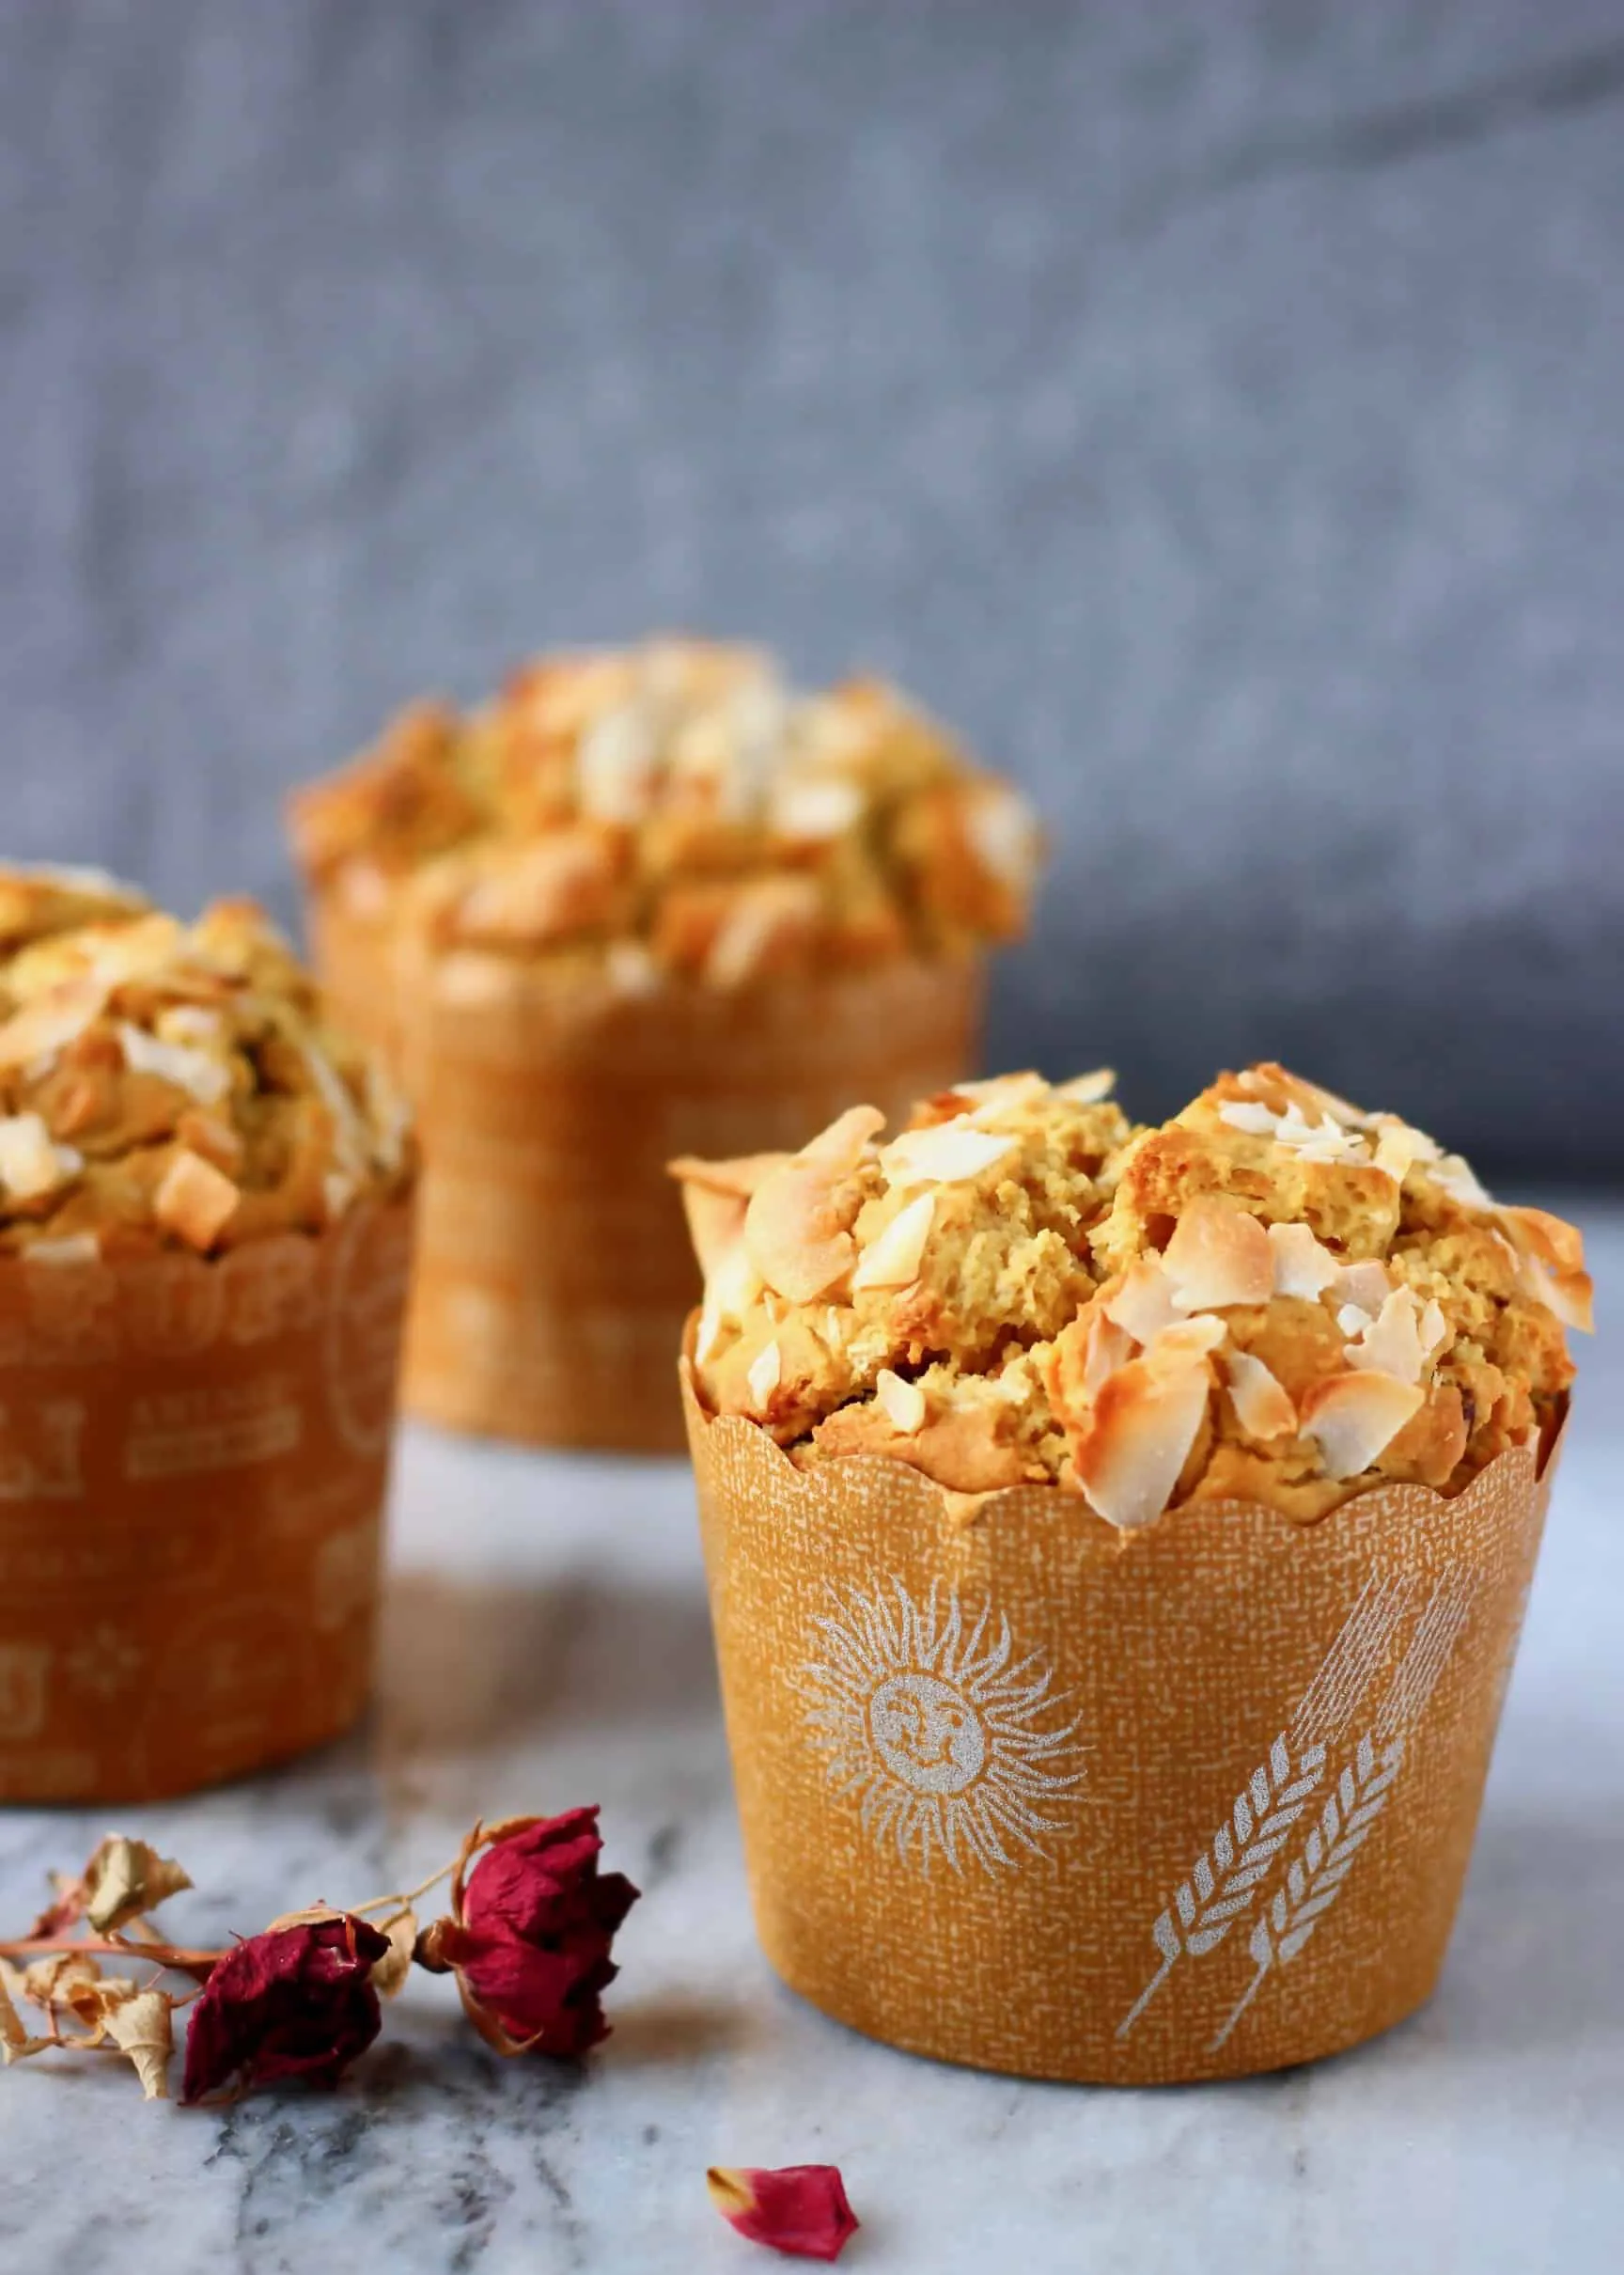 Three gluten-free vegan carrot muffins on a marble slab with a grey fabric background